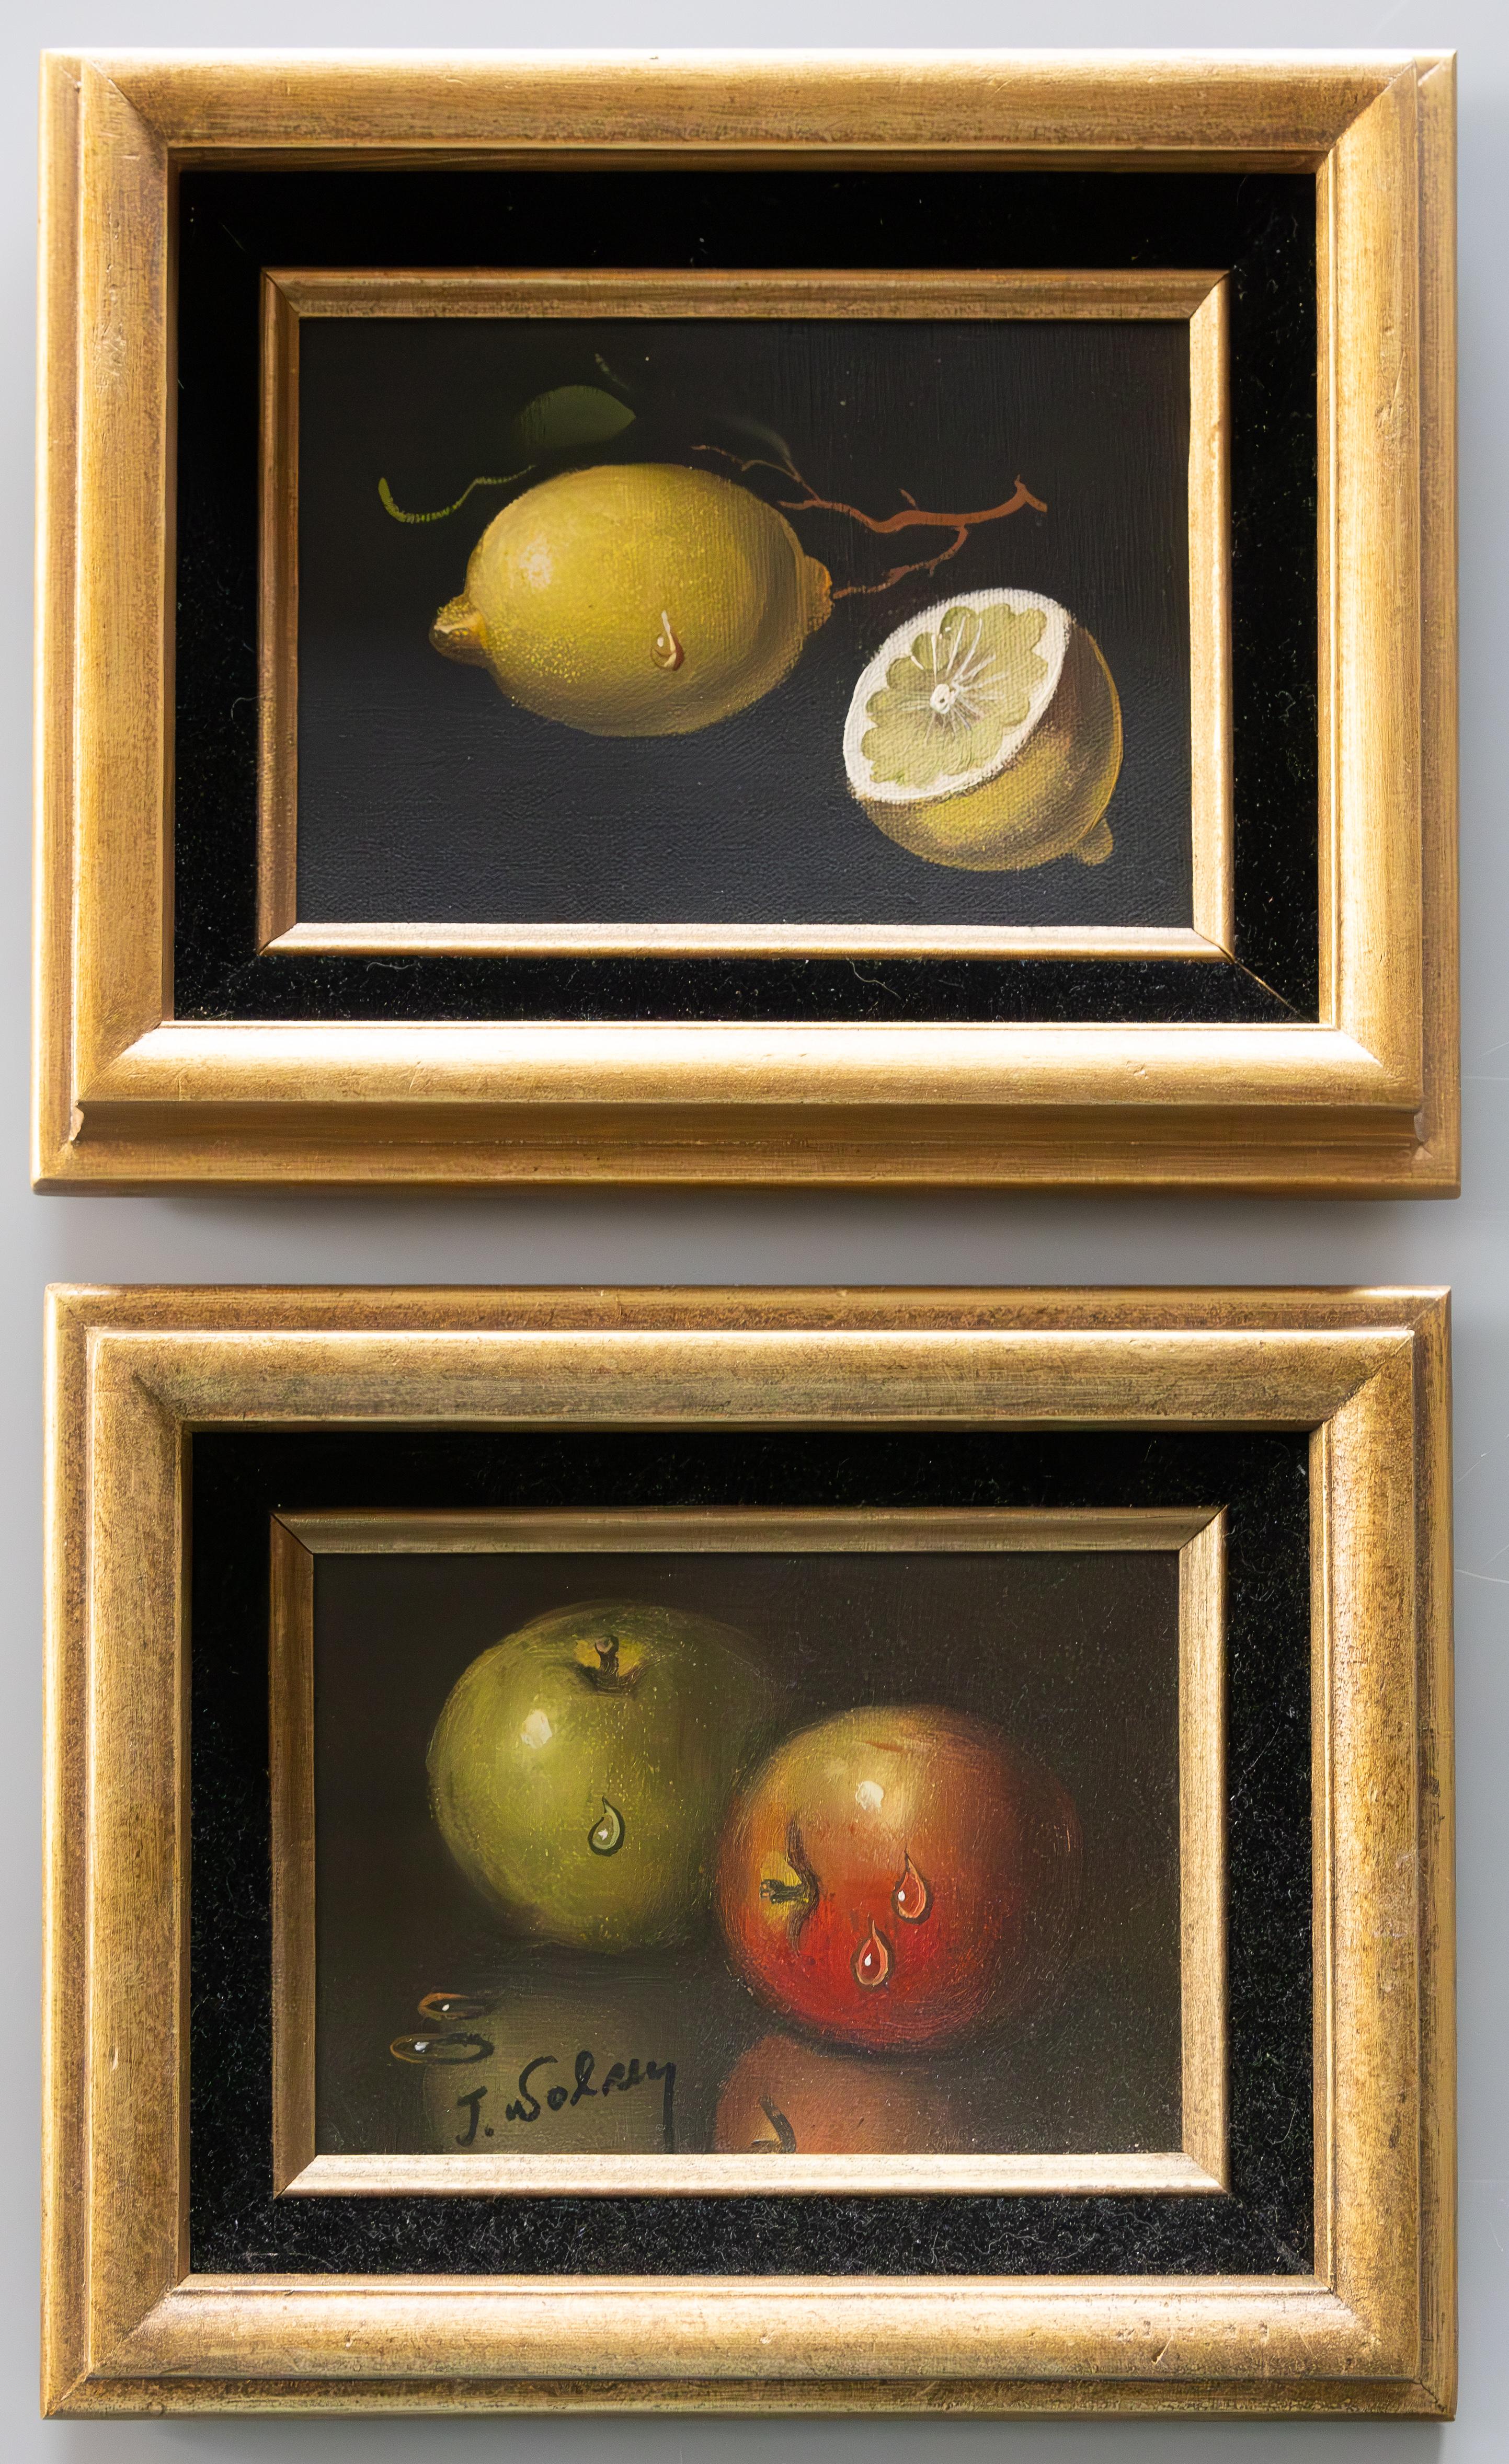 Lovely pair of paintings depicting glistening lemons and apples. Oil on canvas with a board back. The painting with apples is signed, signature indistinct.  Frames are inset with black velvet and lightly guilded. Painting itself measures 5